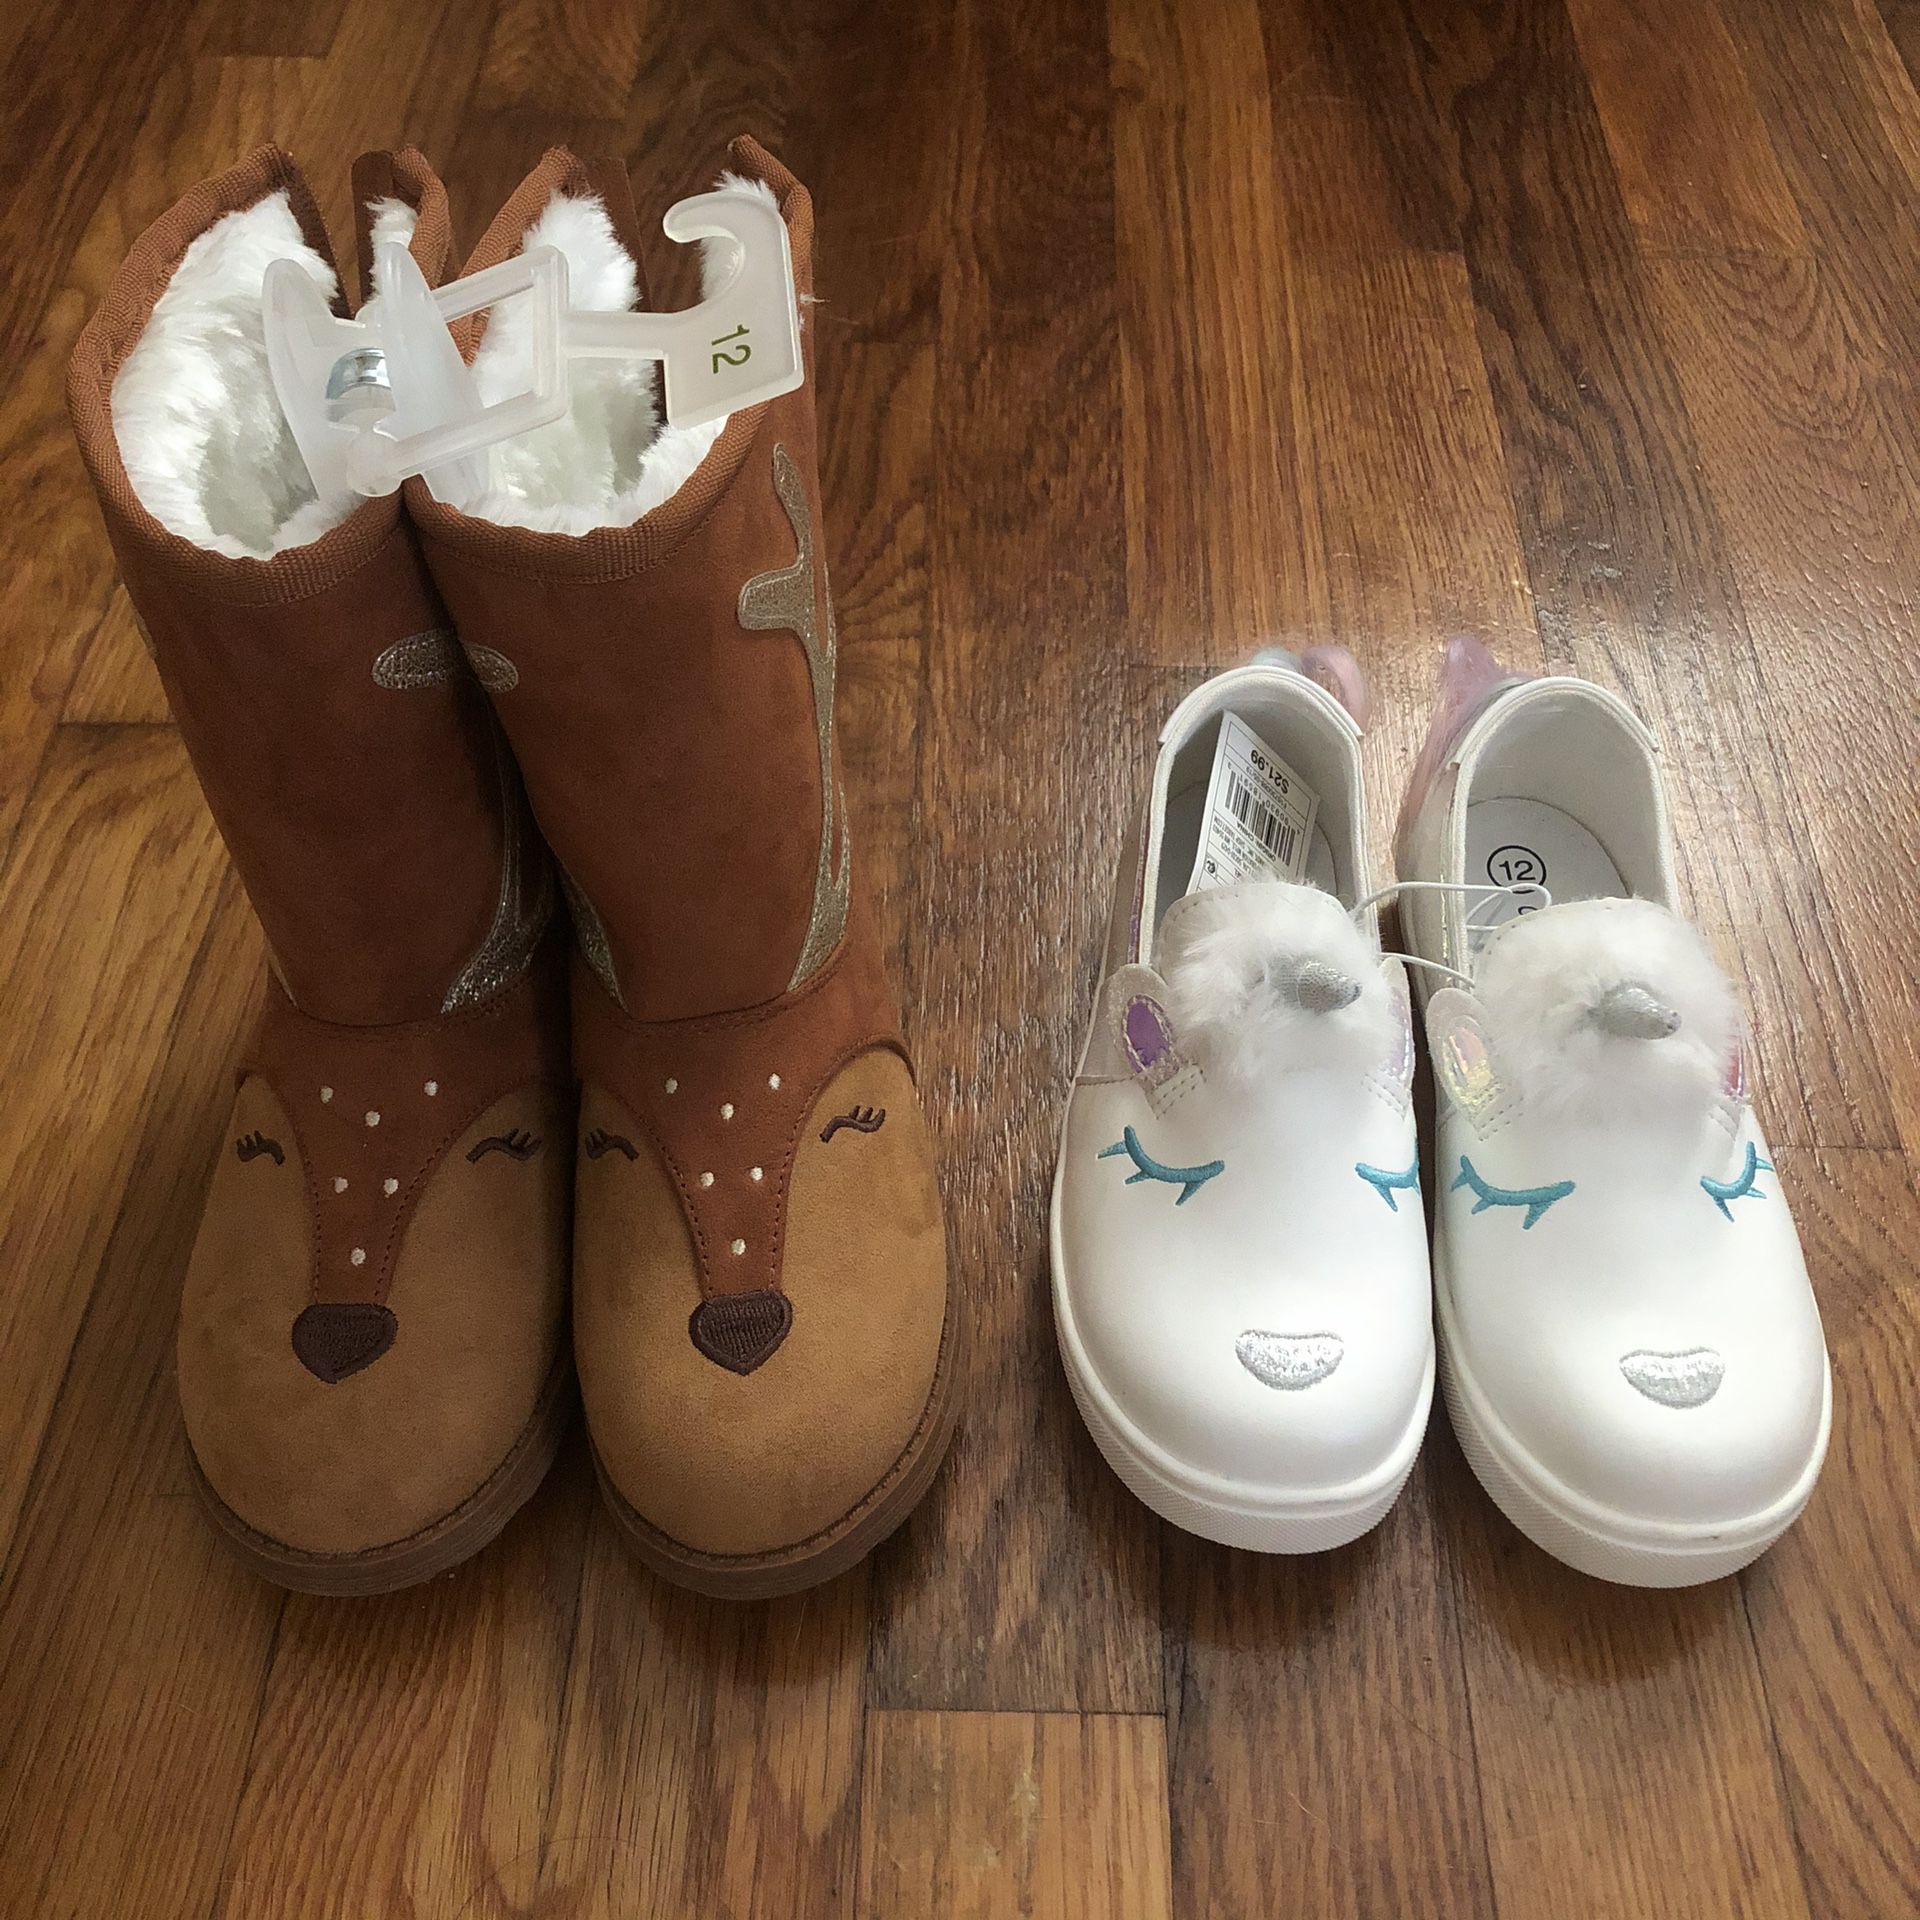 Lot of size 12 girls fur lined boots and unicorn sneakers, new